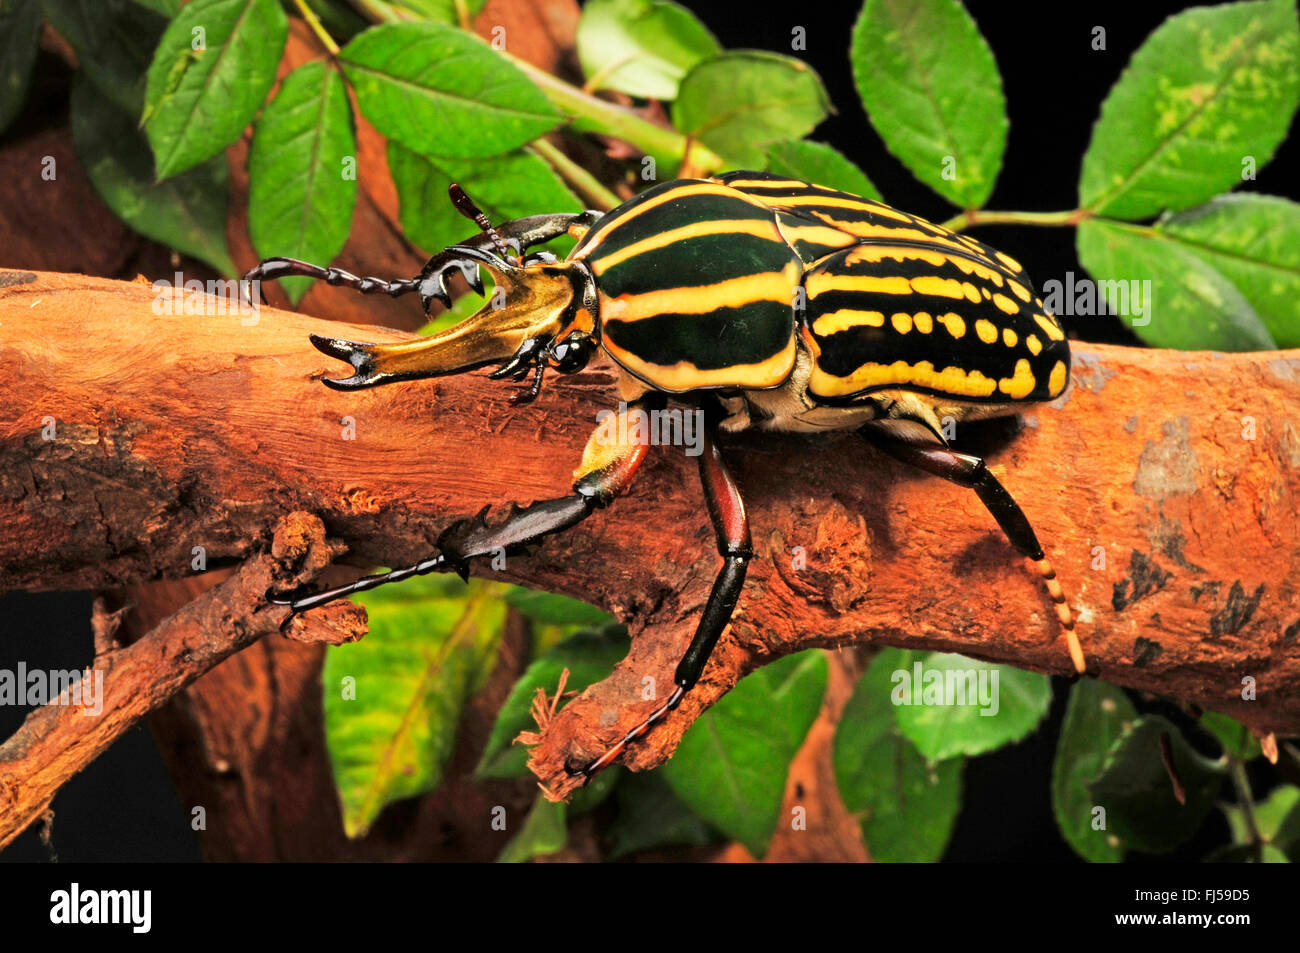 Flower chafer, flower chafer, flower beetle (Mecynorrhina savagei), on a branch Stock Photo